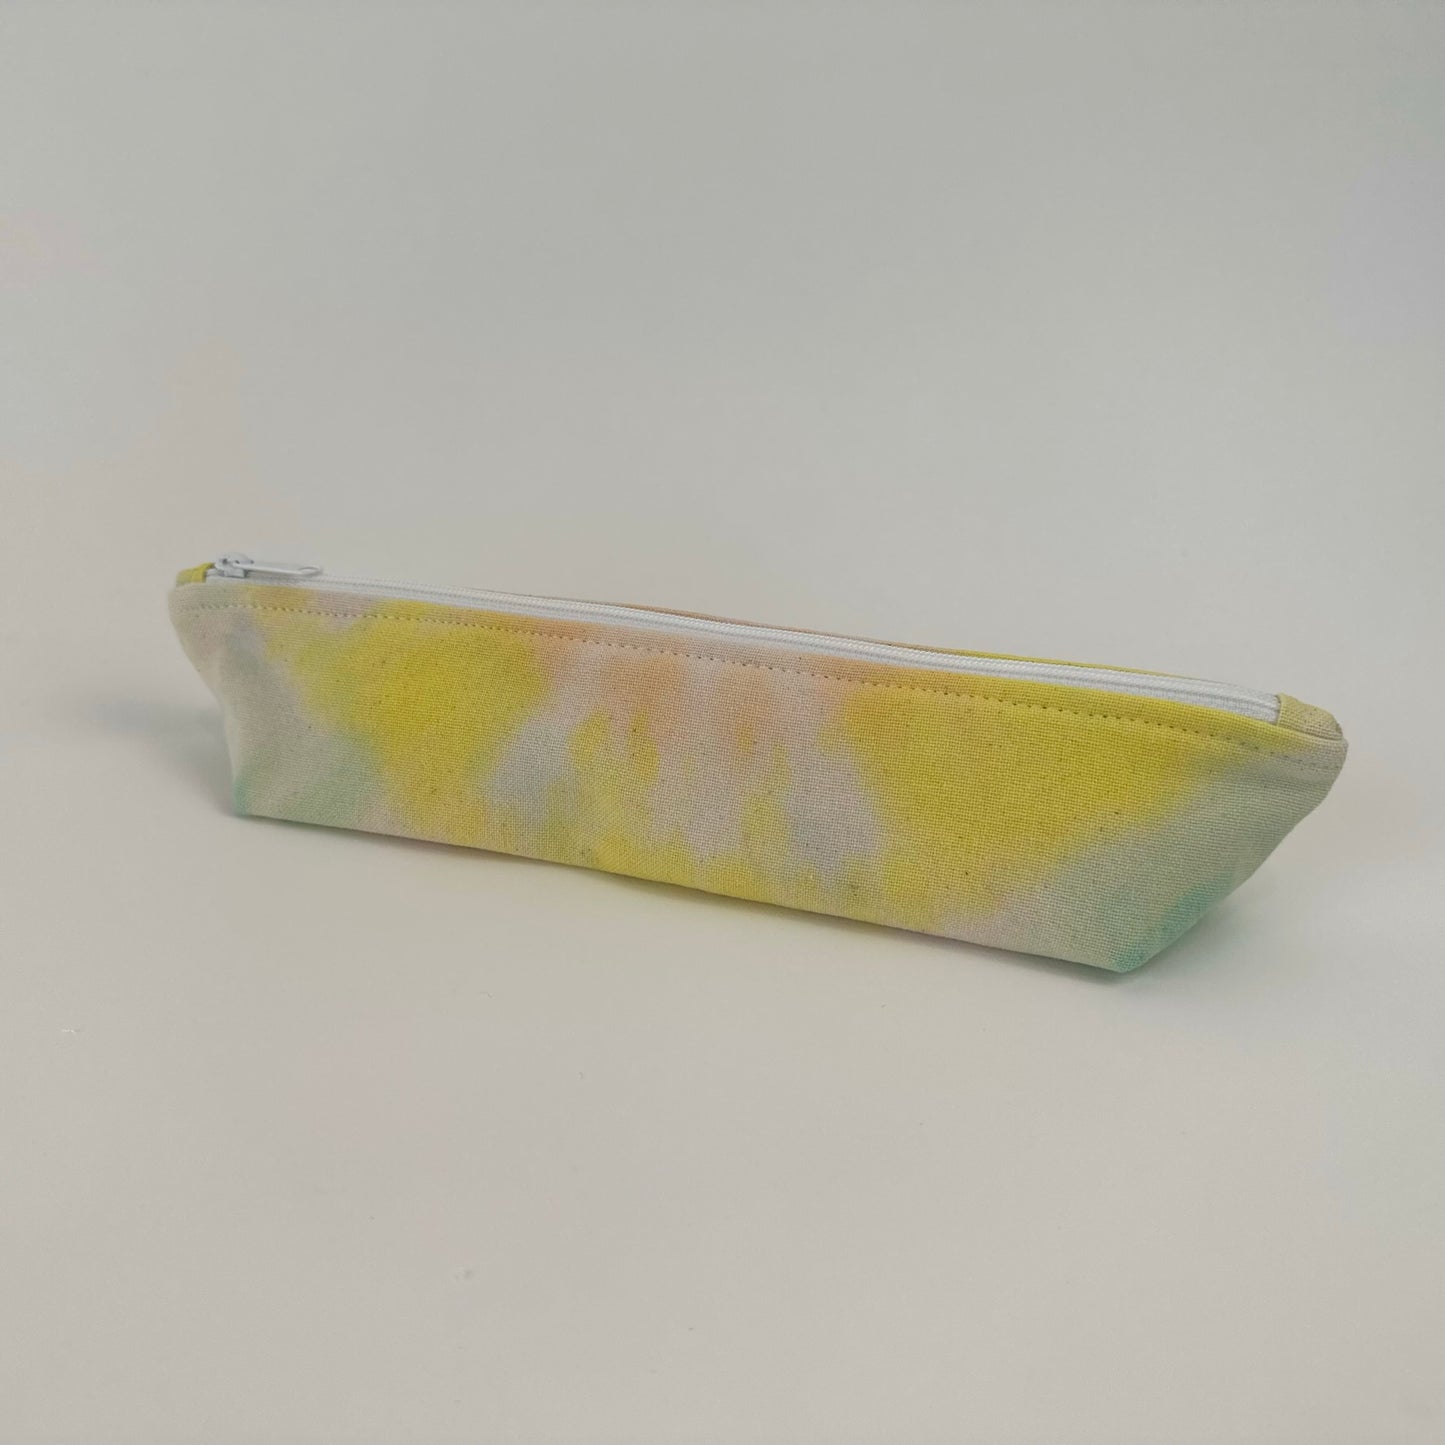 Back view of a Miche Niche zipper pouch in a hand dyed pastel yellow, green, and pink tie dye pattern